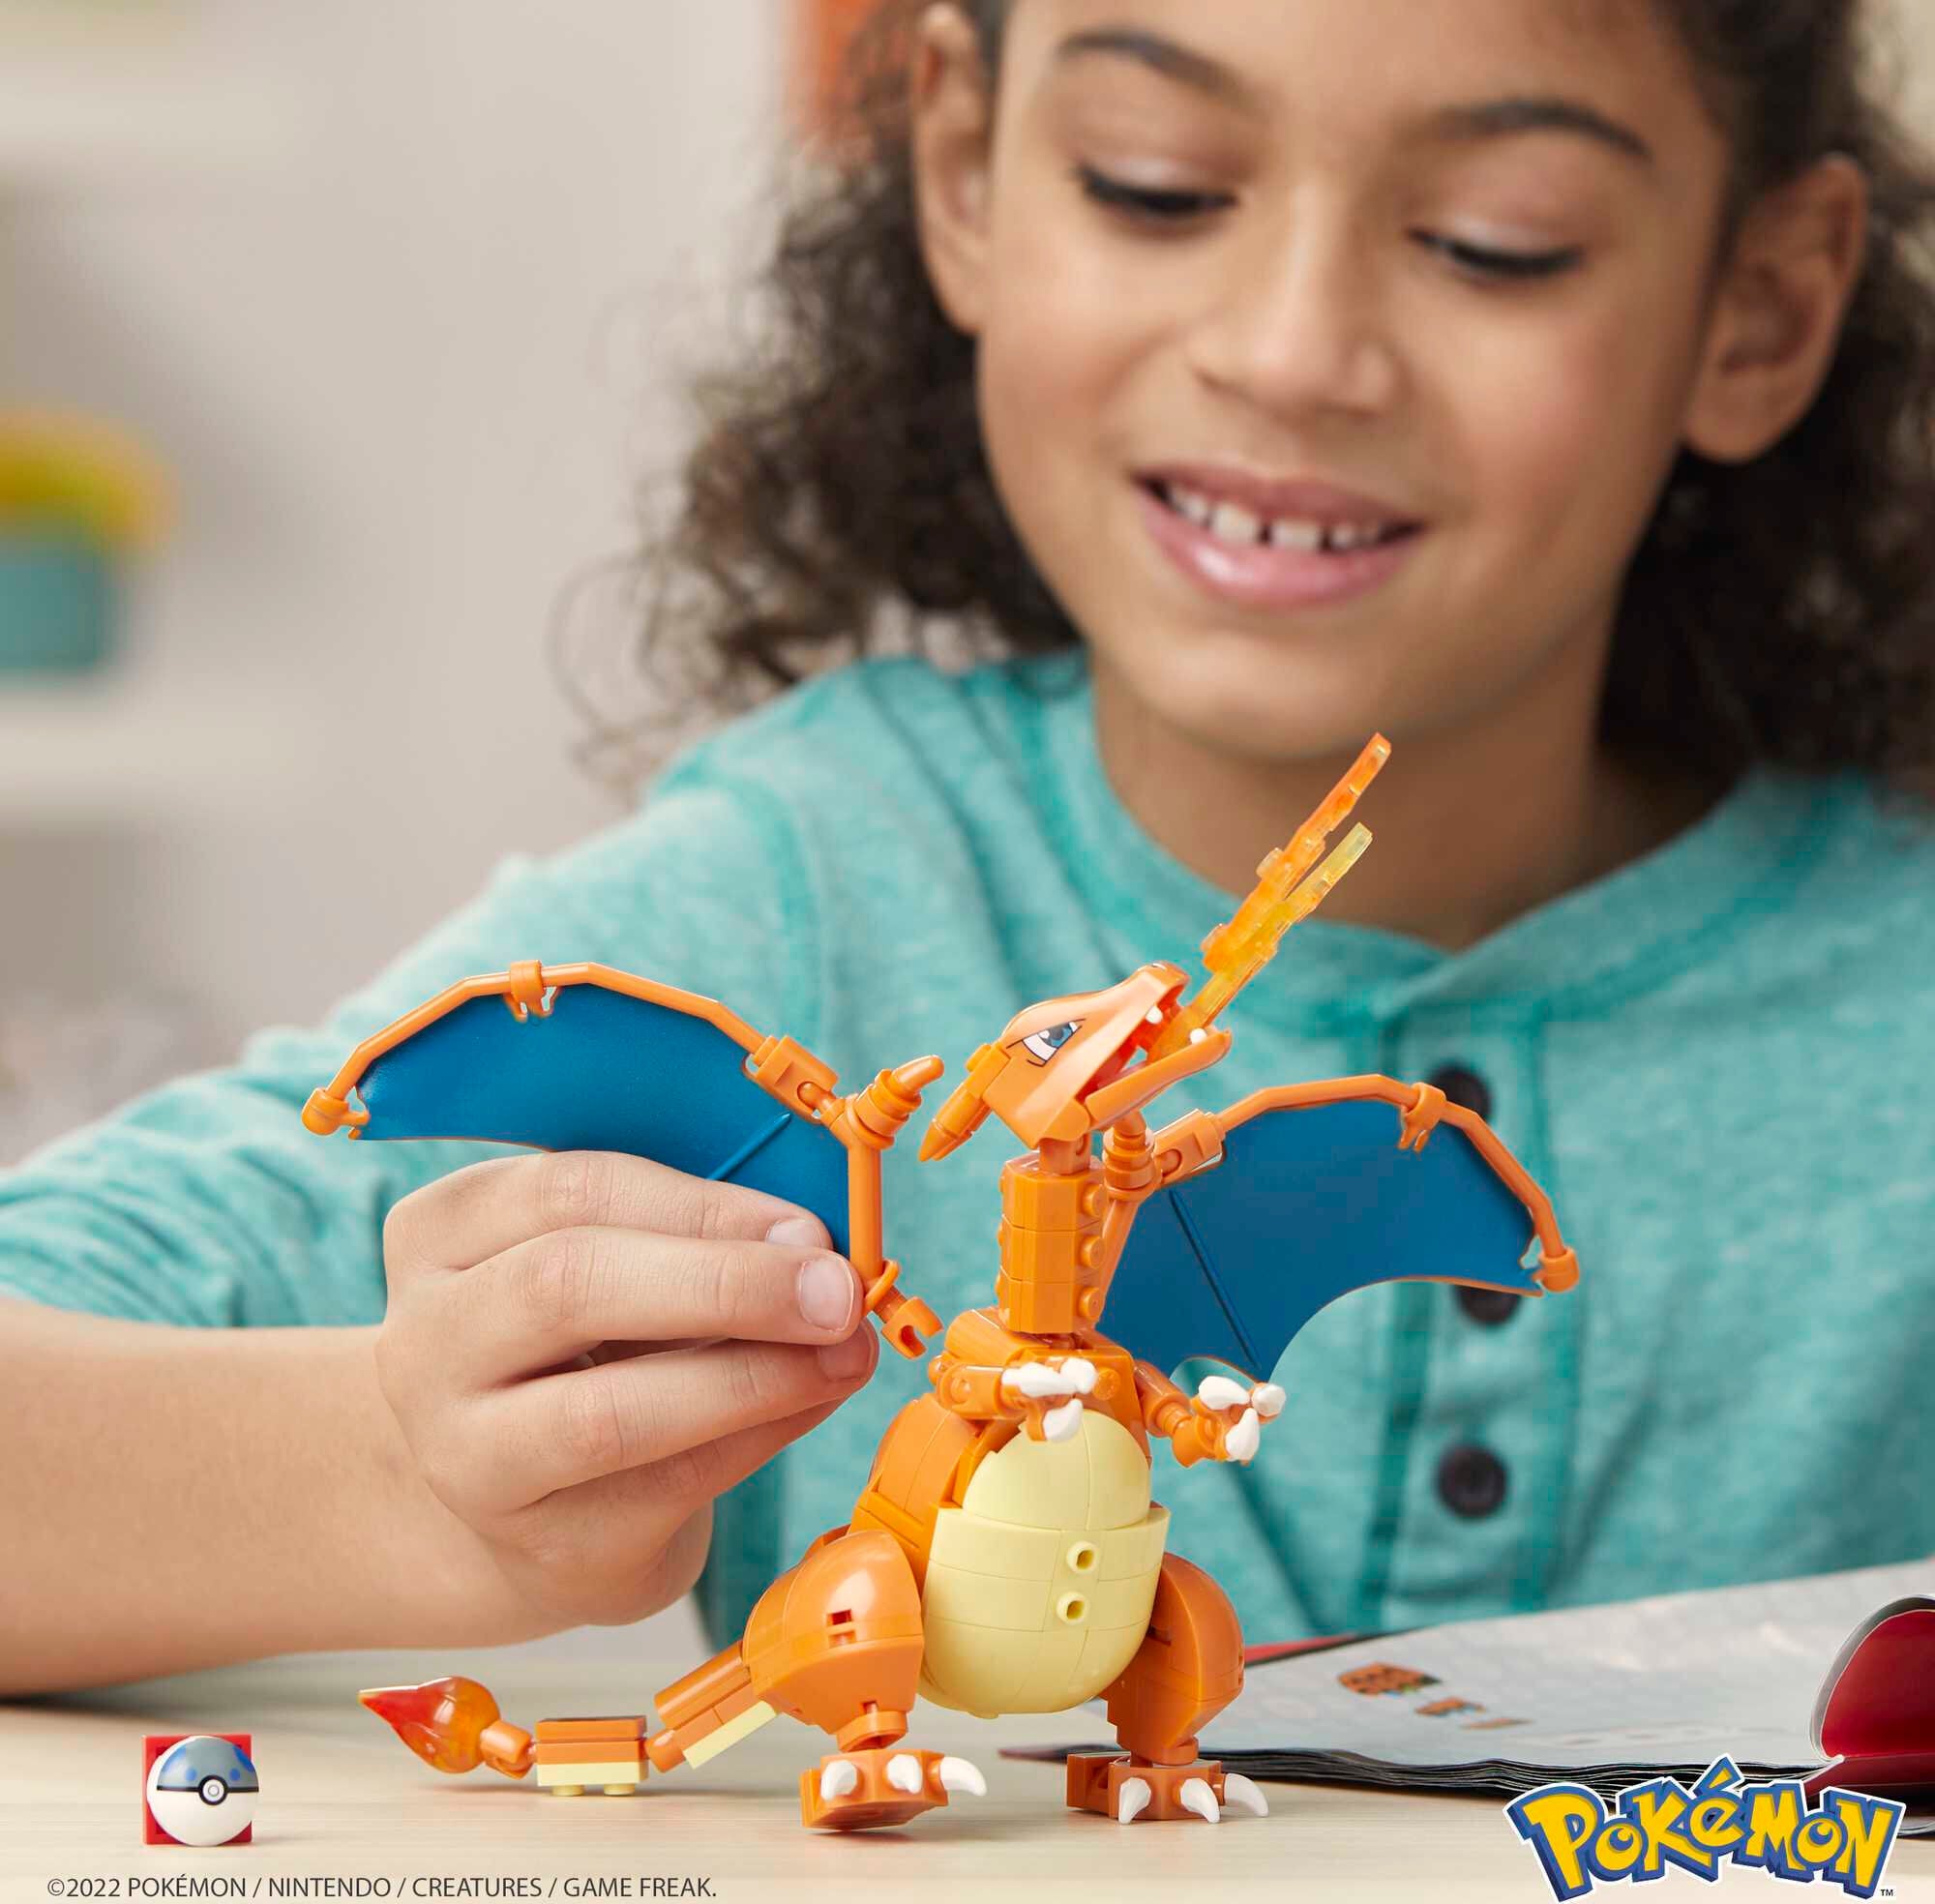 MEGA Pokemon Building Toy Kit Charizard (222 Pieces) with 1 Action Figure for Kids | MTTS177